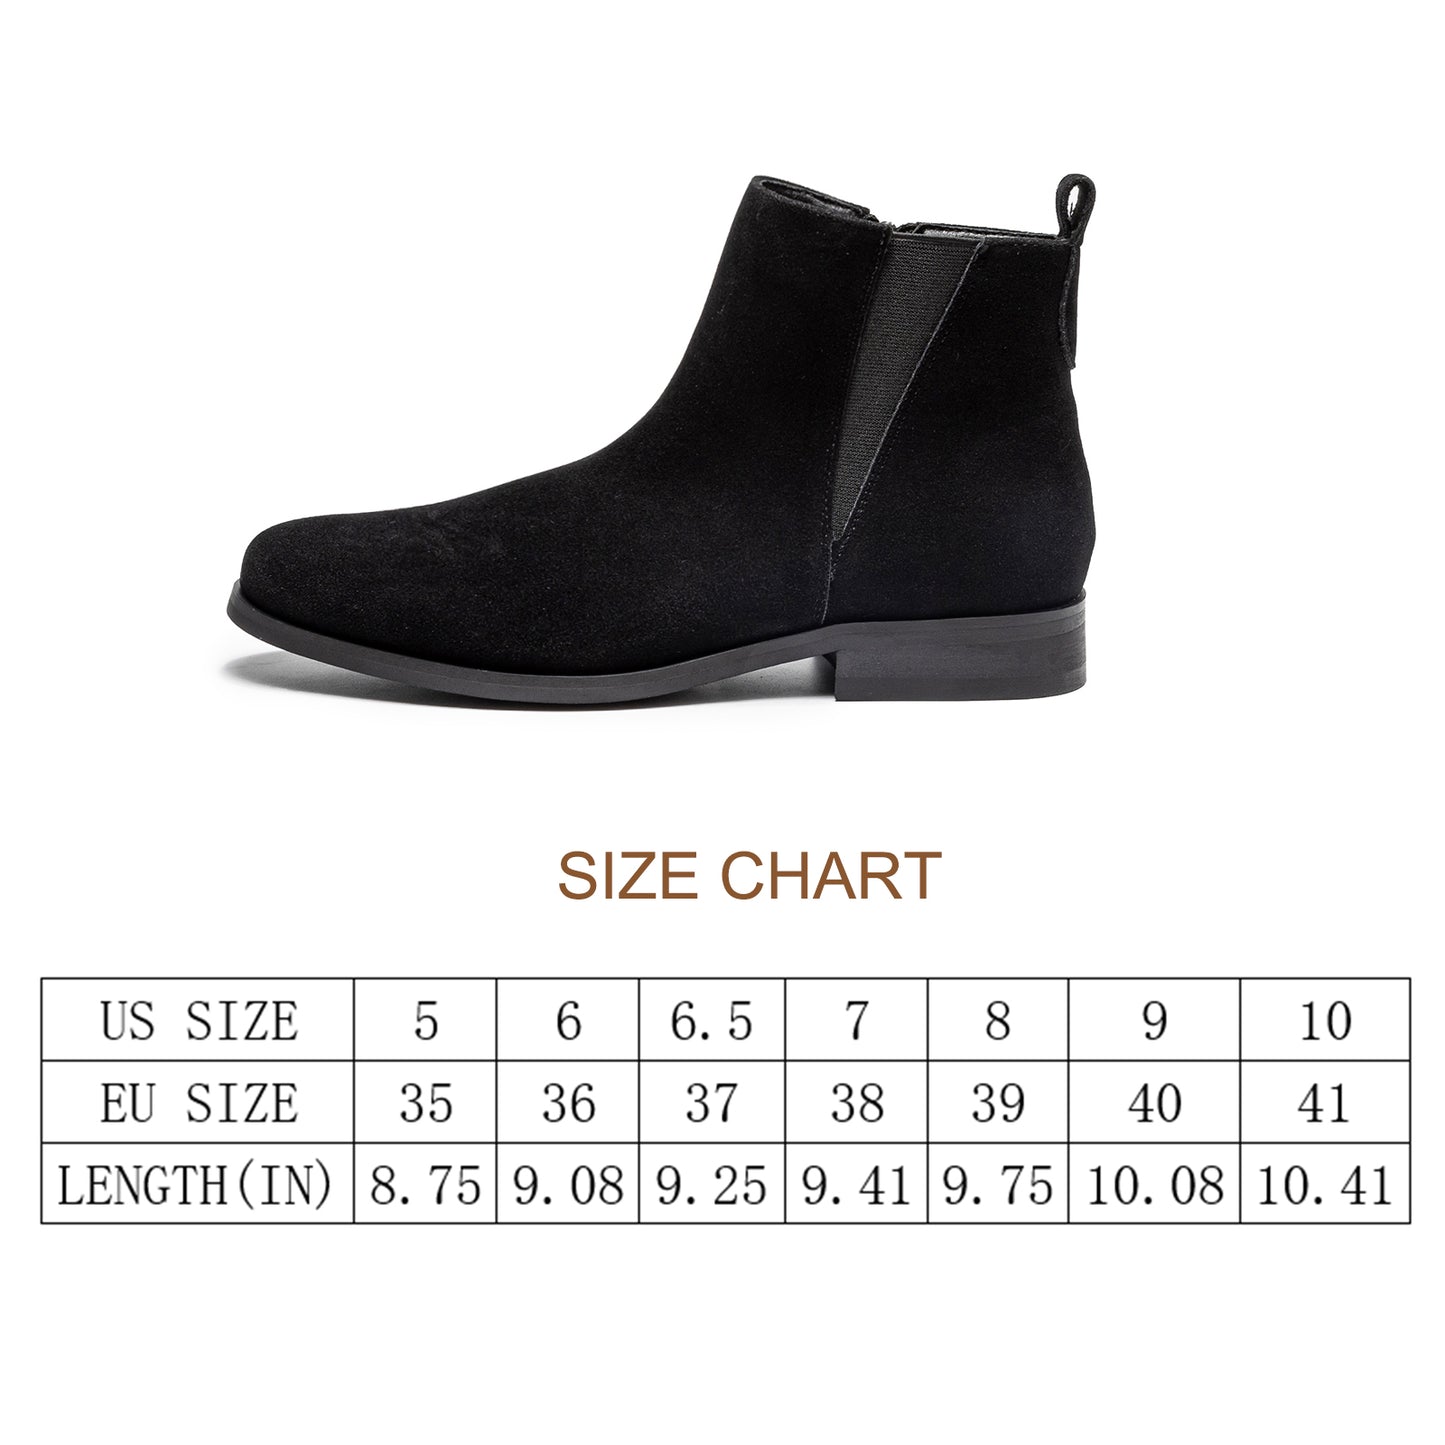 Women's Suede Leather Chelsea Low Heel Ankle Boots for Women,Casual Dress Ankle Bootie